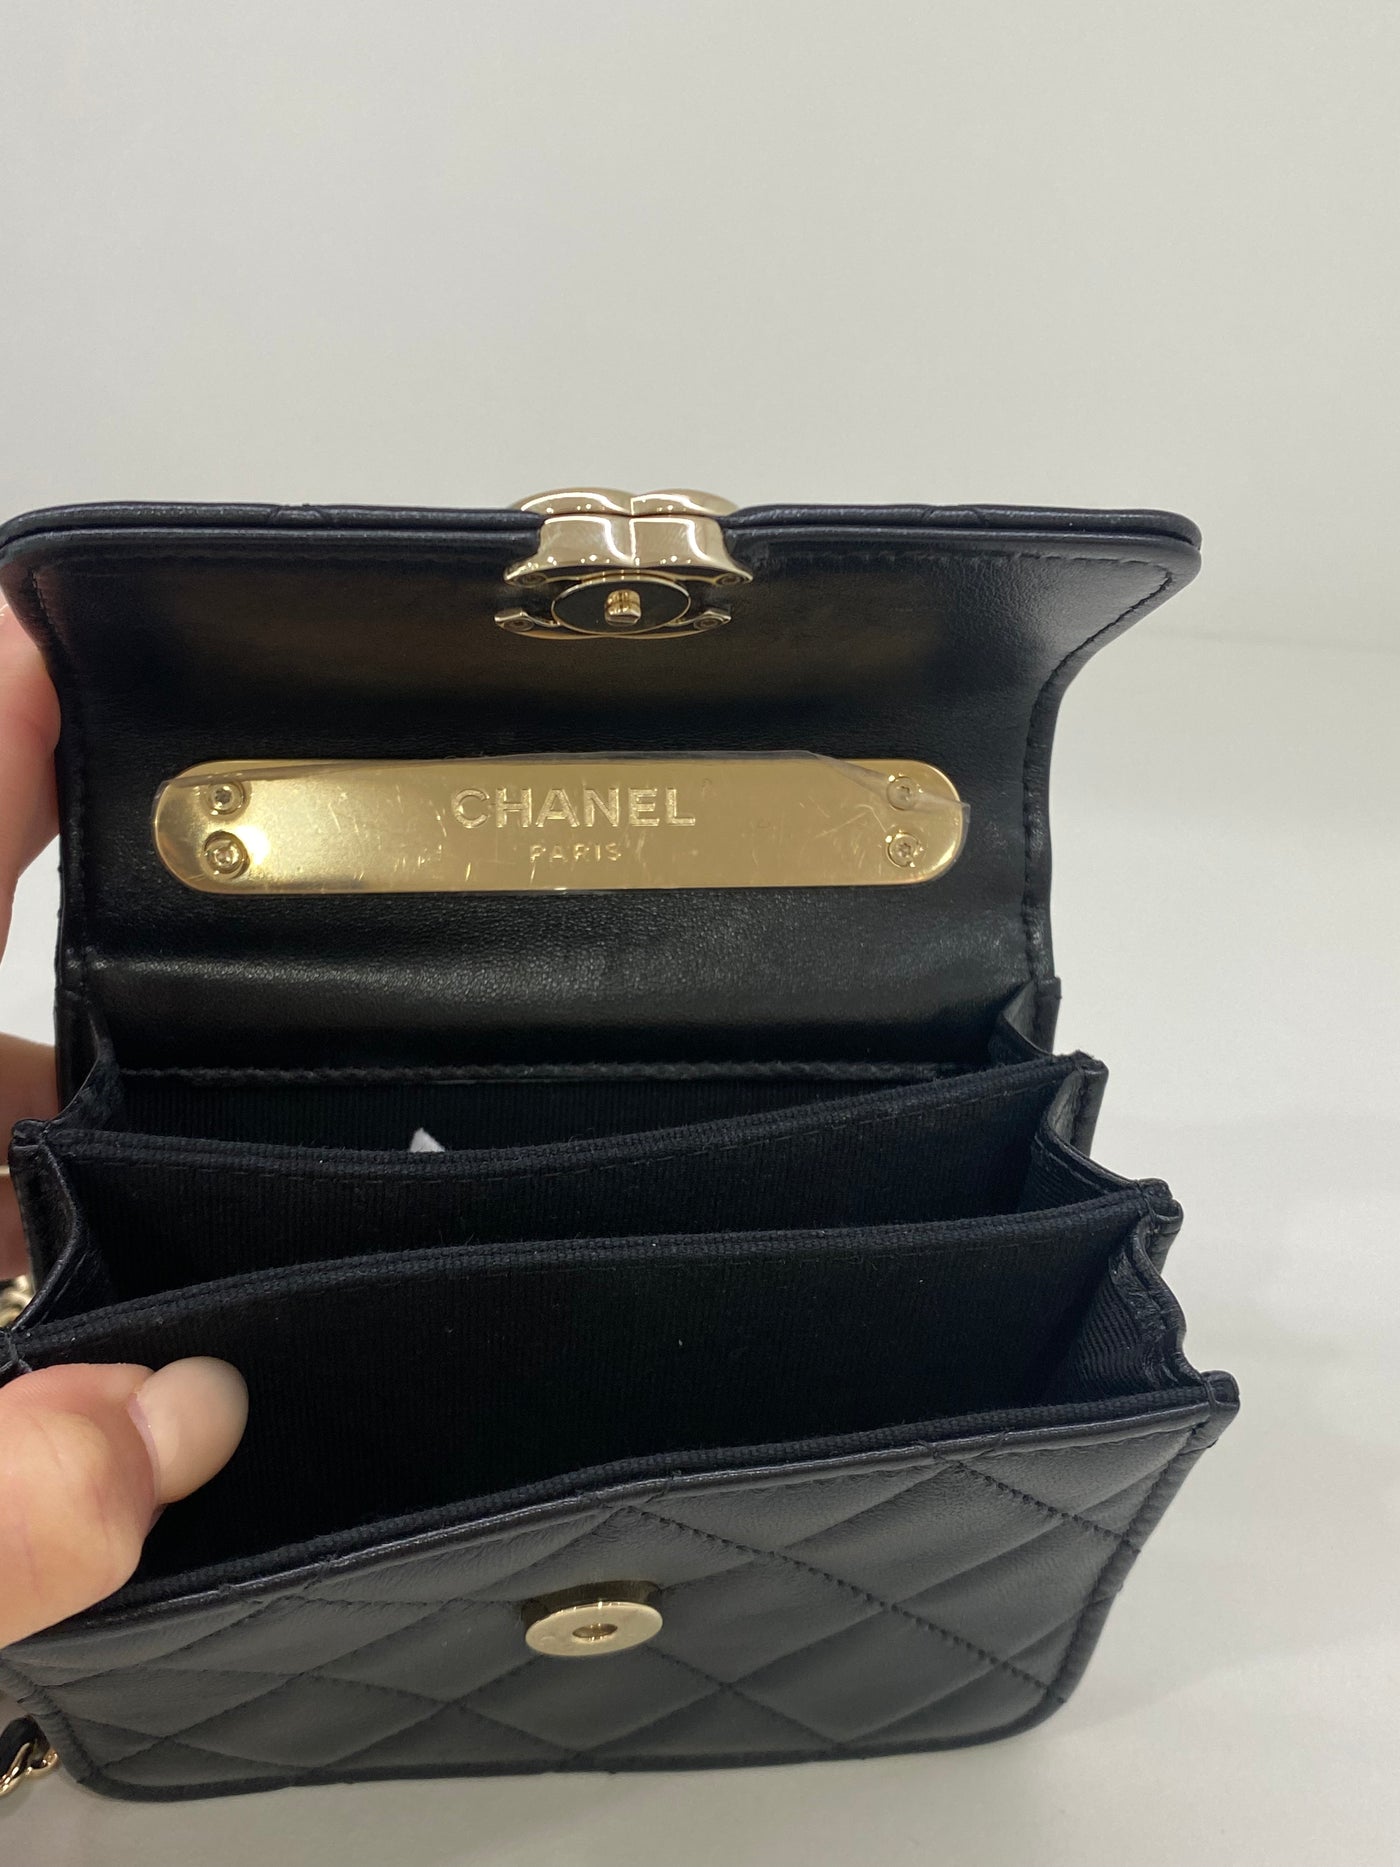 Chanel Coin Purse with Strap- Black